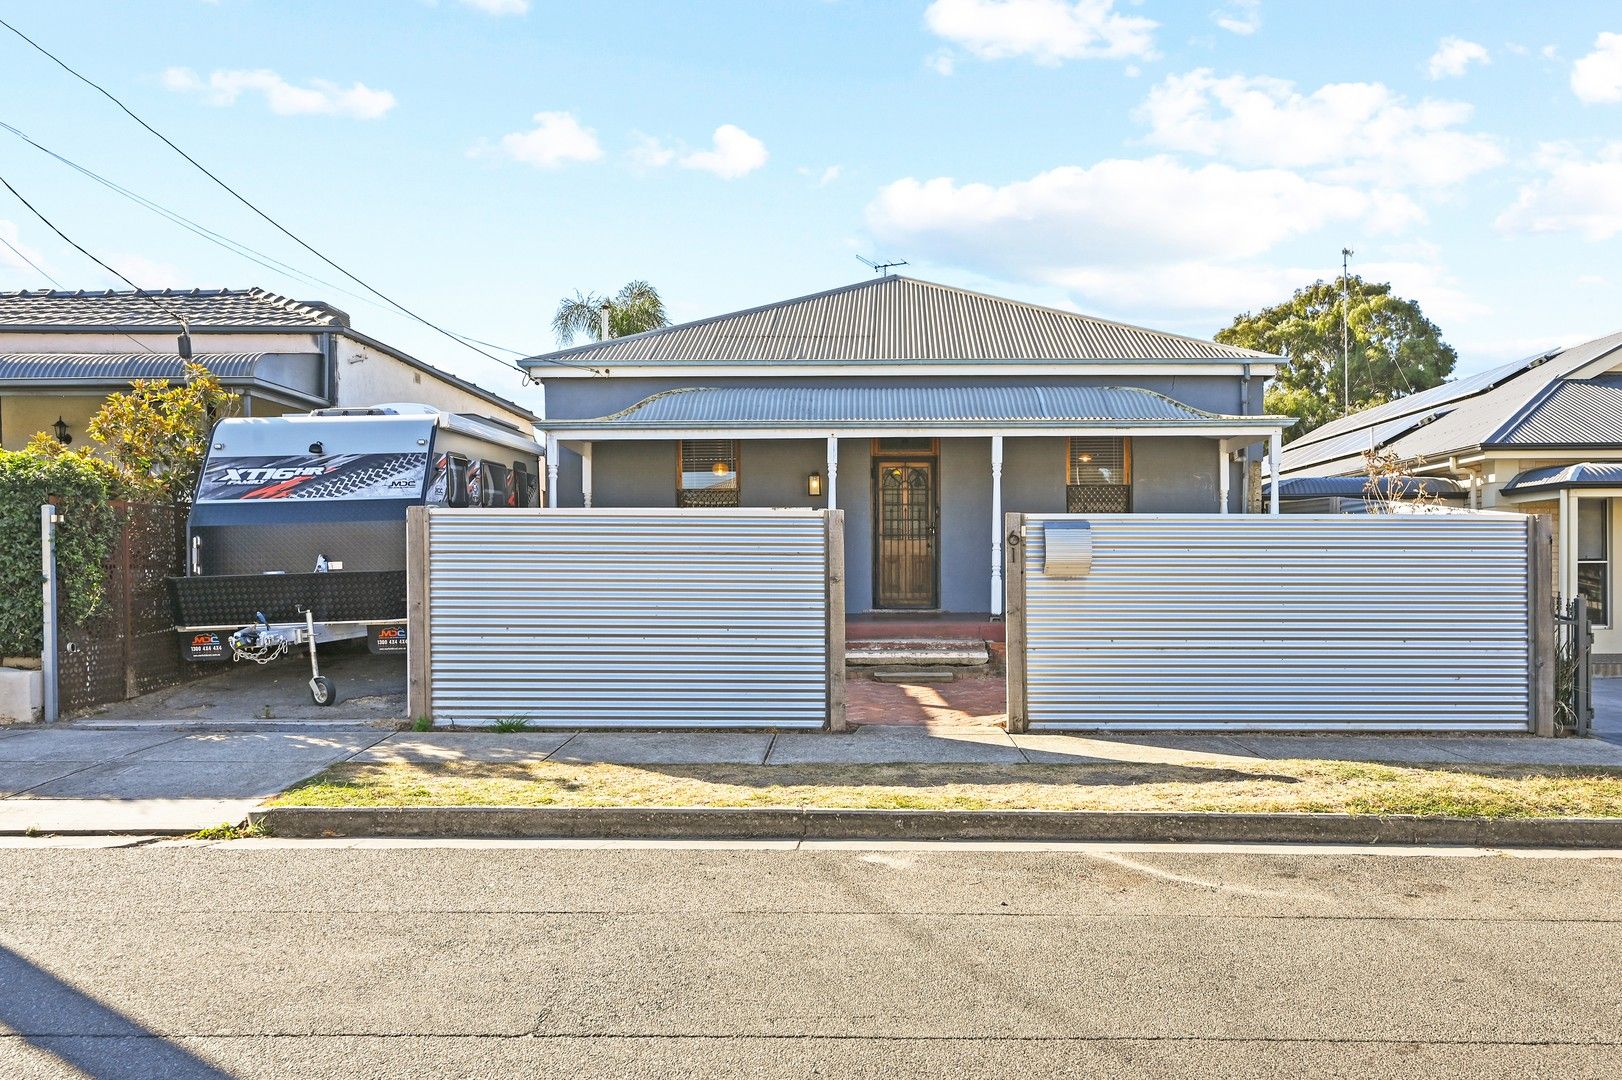 4 bedrooms House in 61 Dudley Street SEMAPHORE SA, 5019